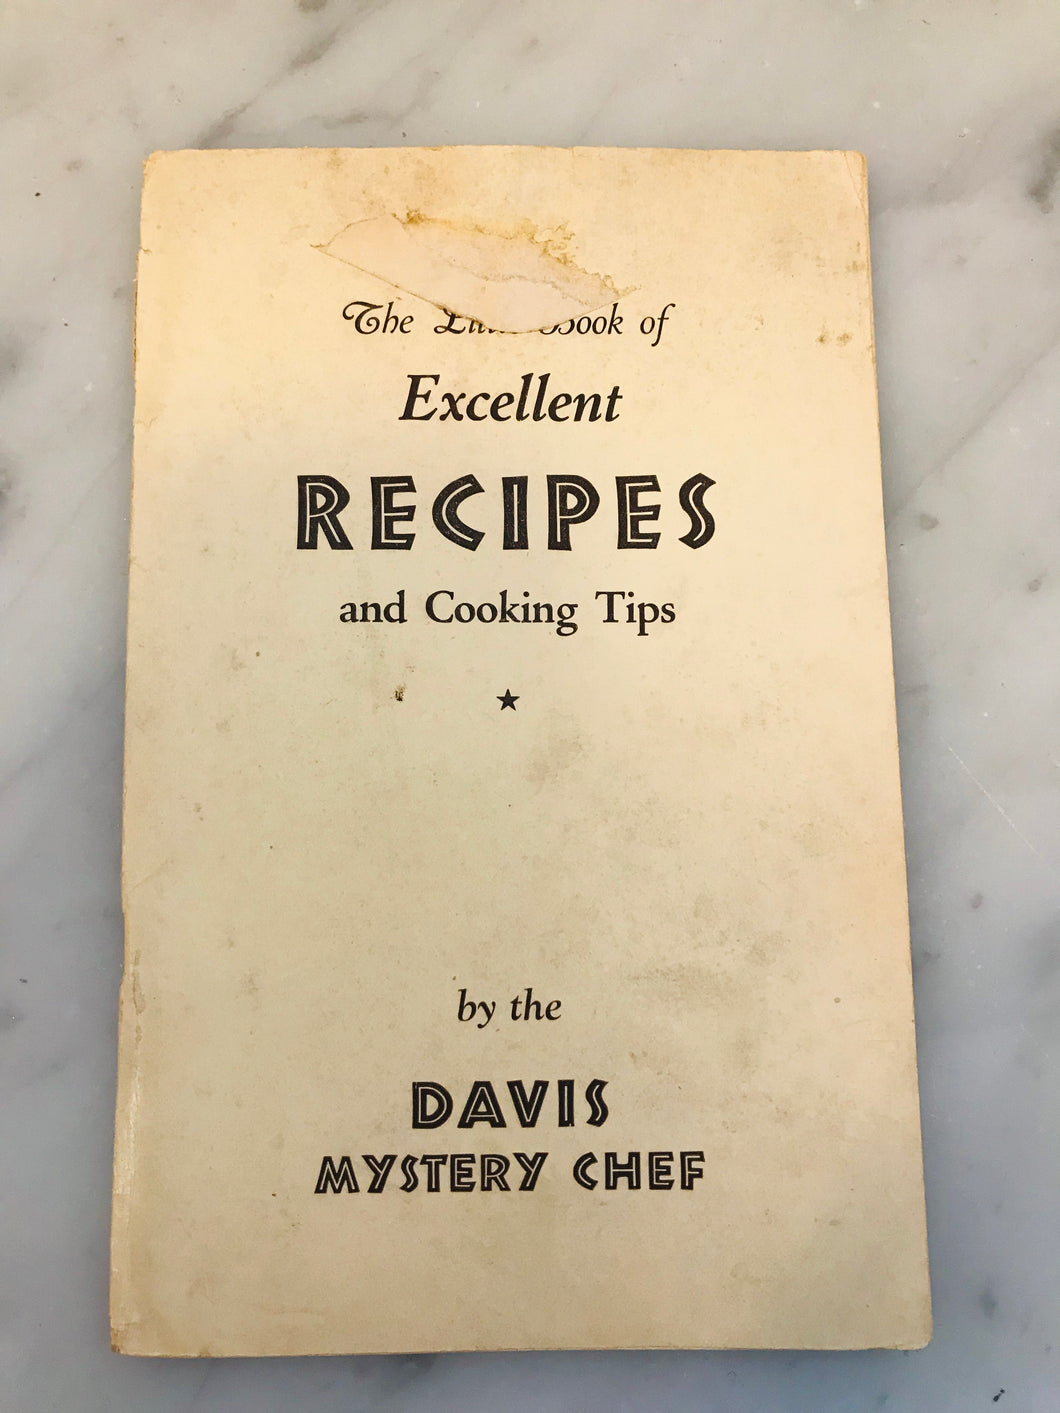 The Little Book of Excellent Recipes and Cooking Tips